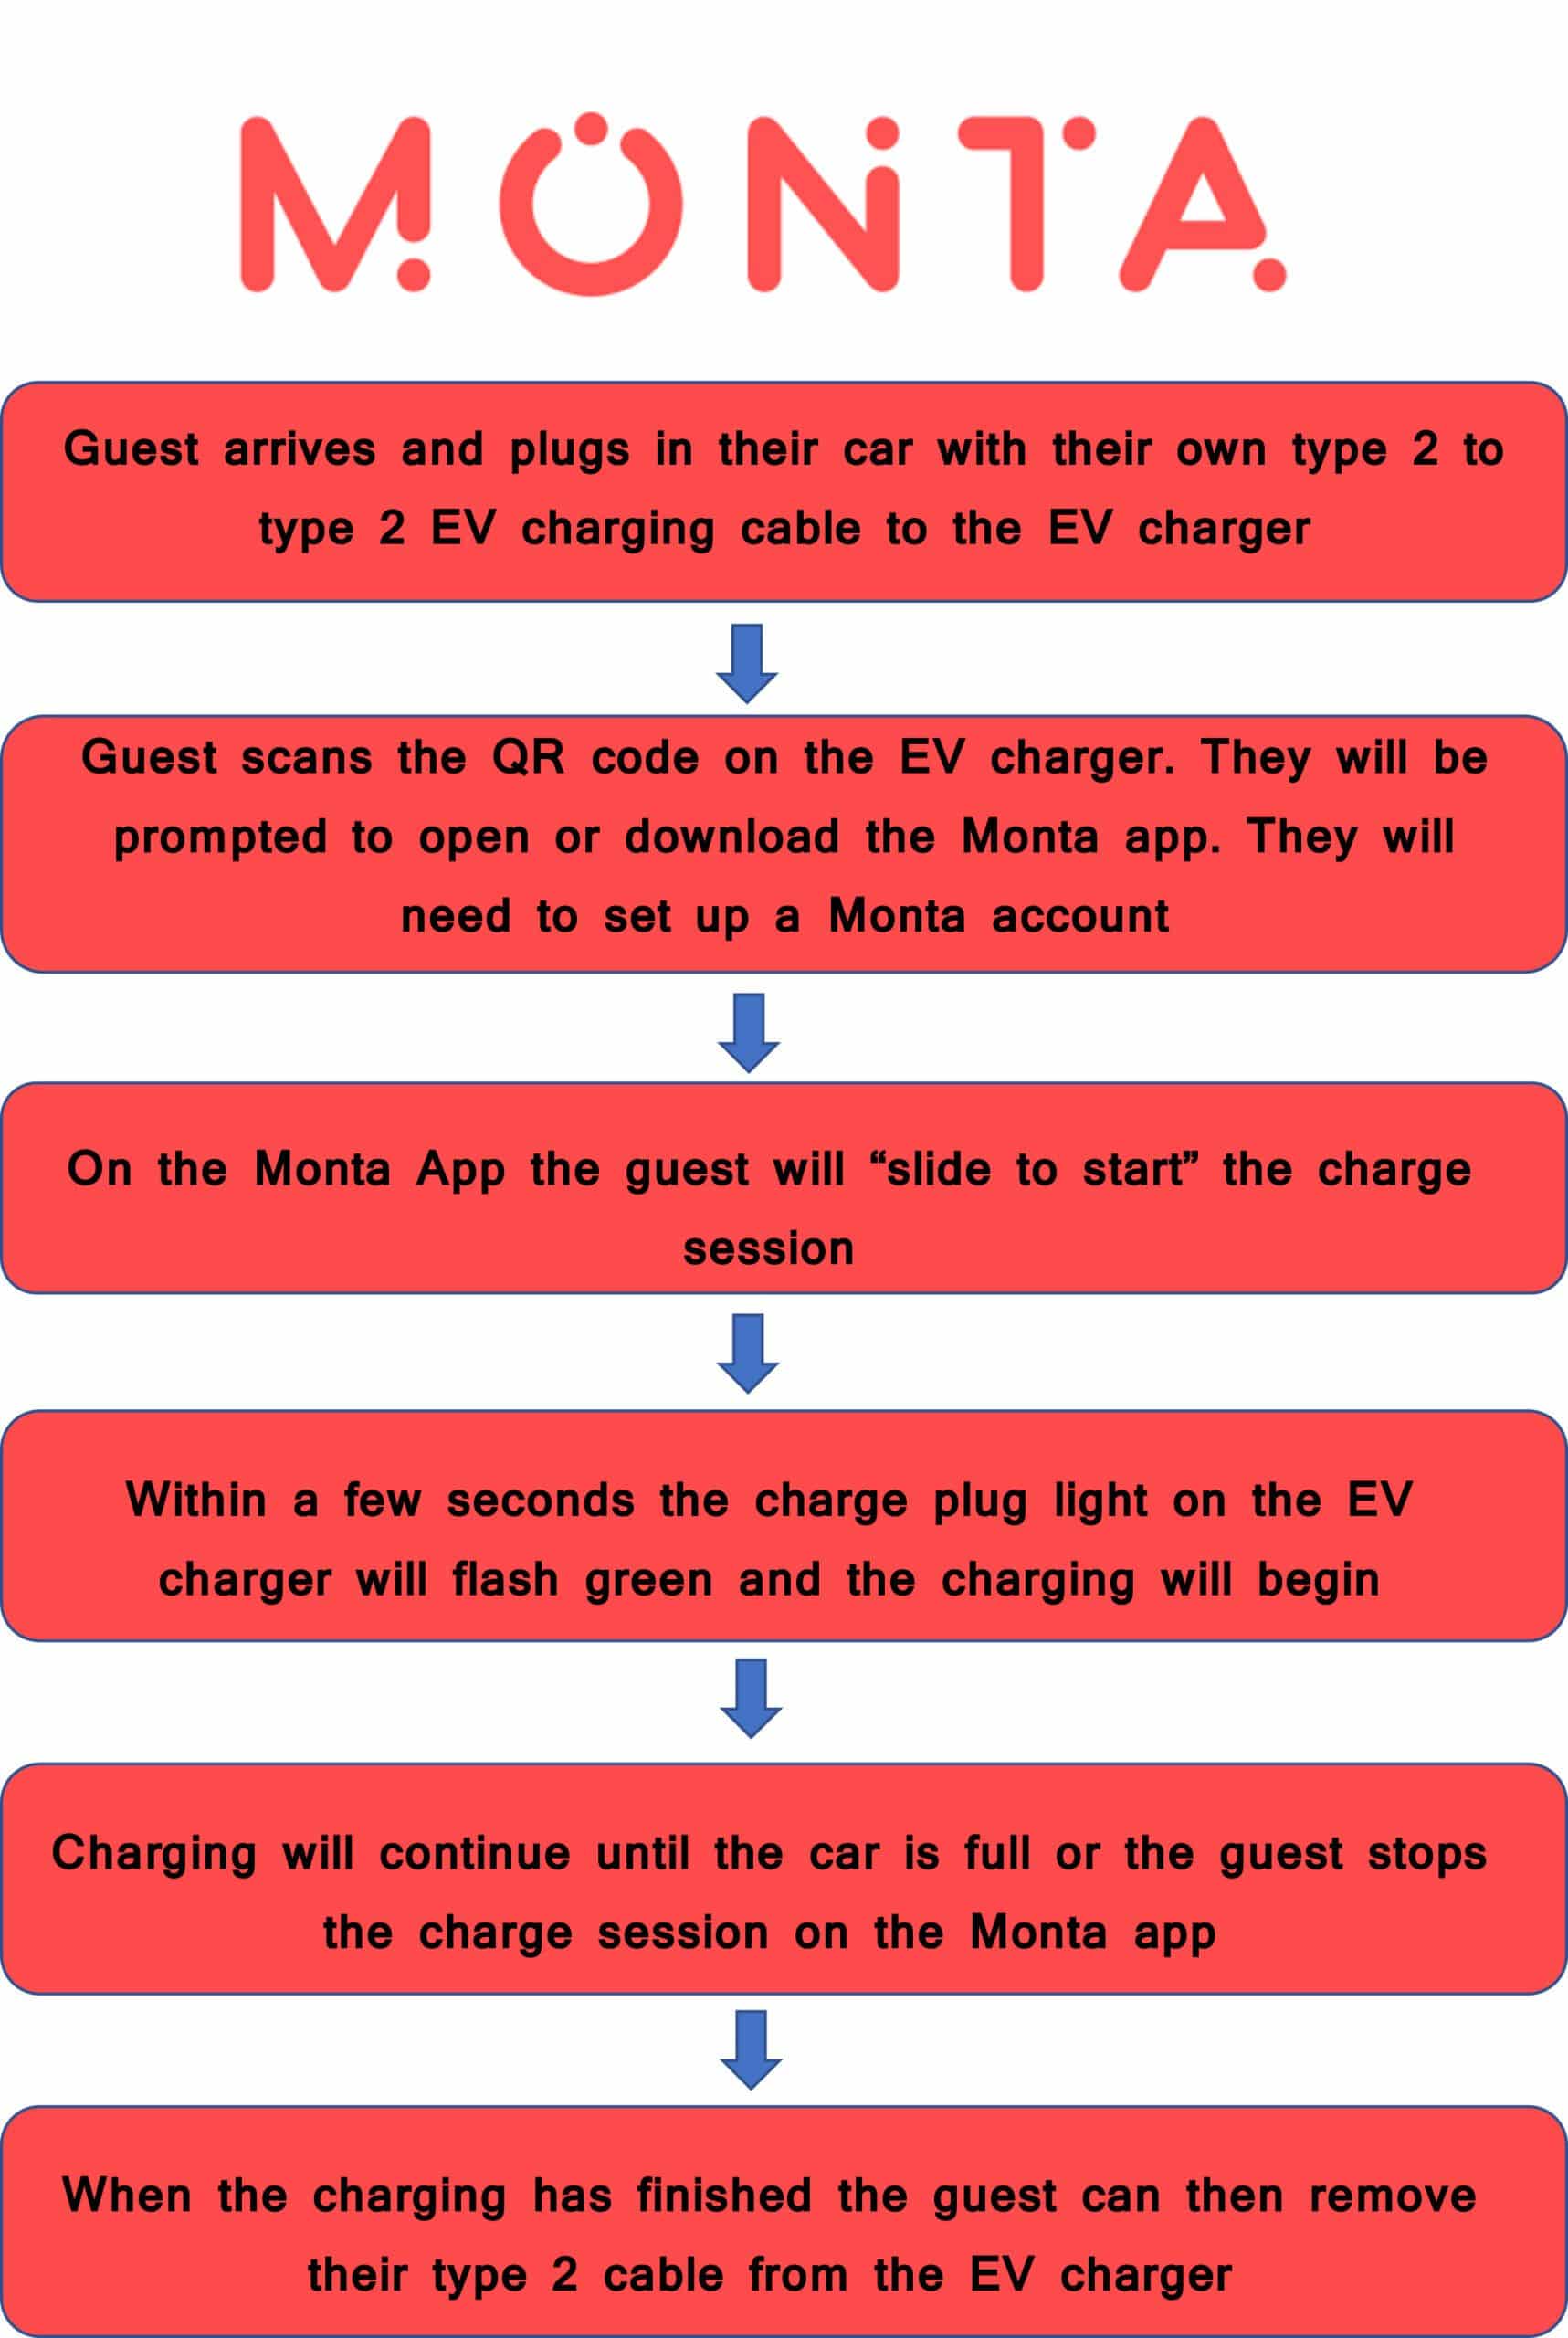 A guide to using the Monta App for car charging